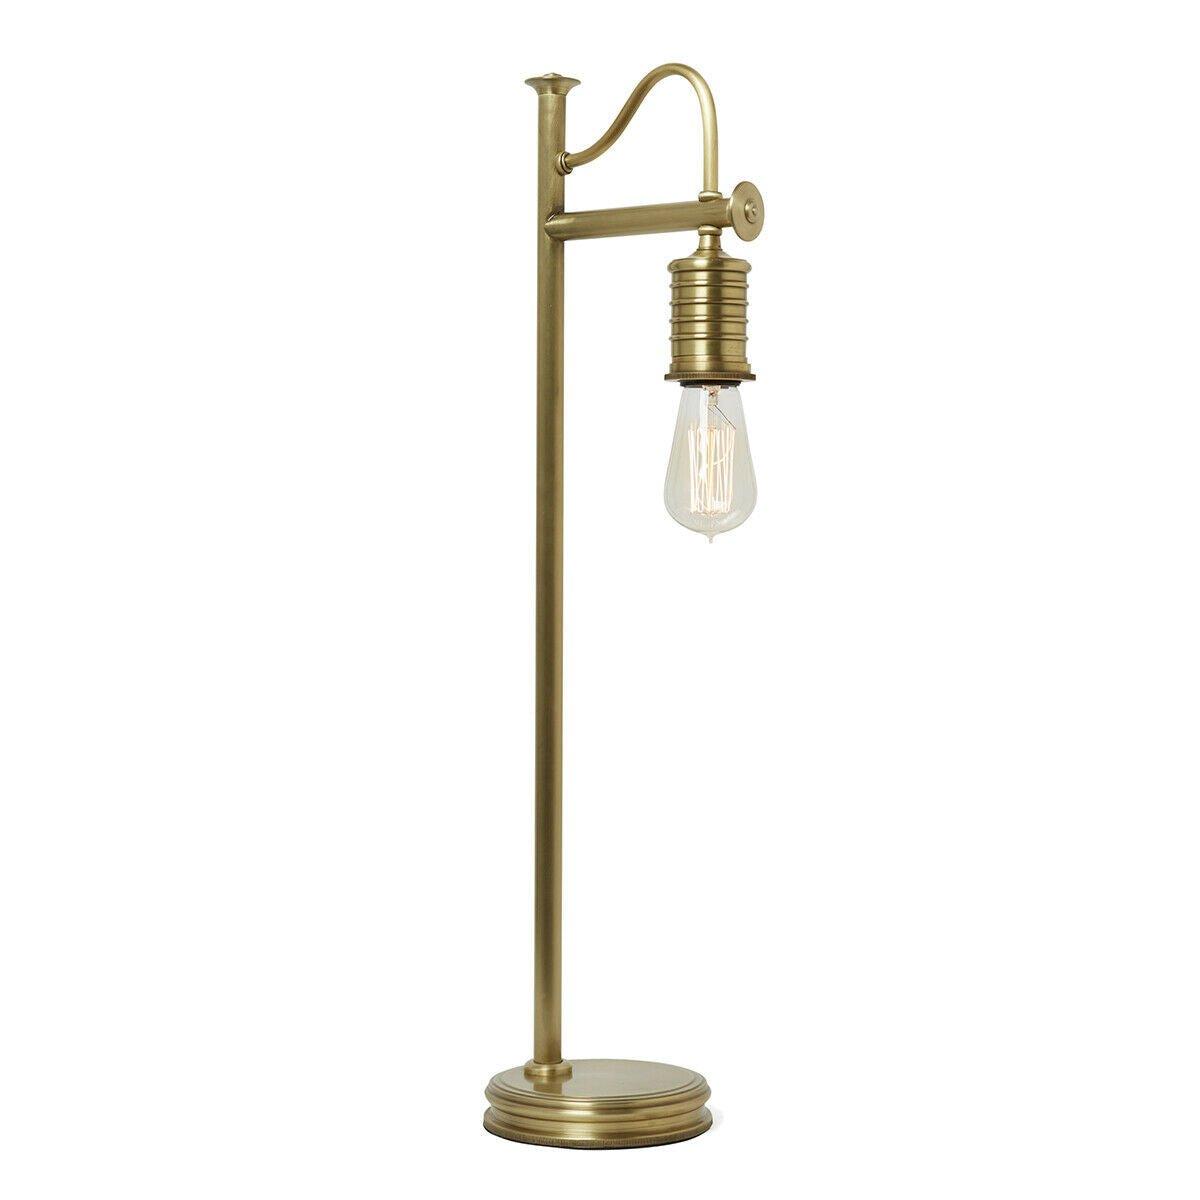 Table Lamp Hanging Lamp Holder Old Fashioned Aged Brass Finish LED E27 60W Bulb